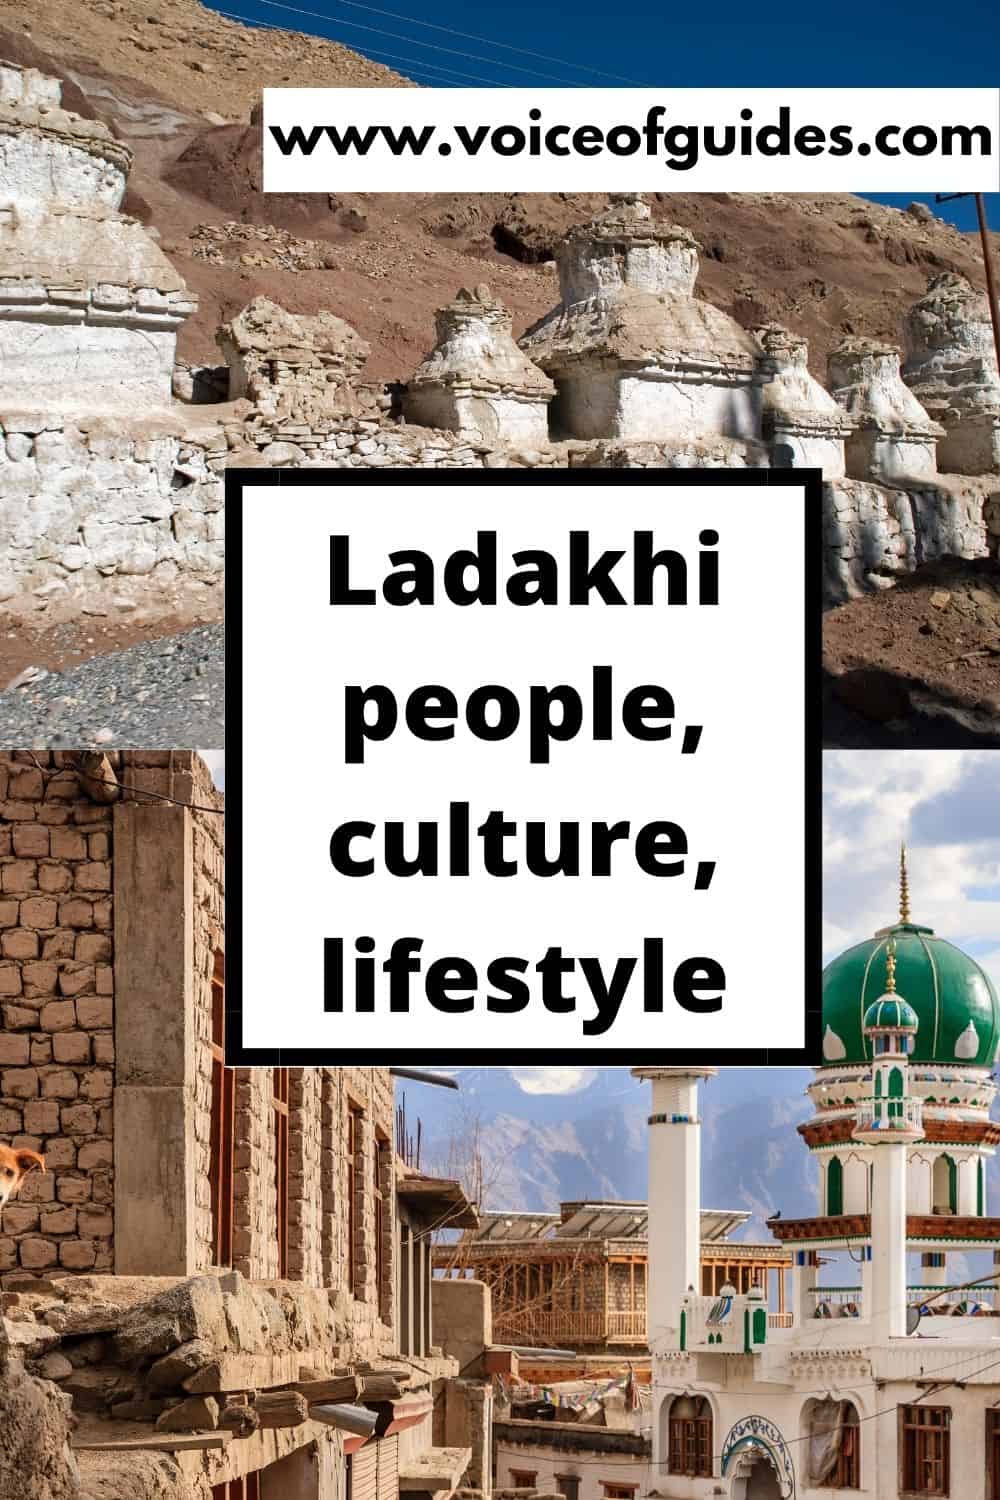 Ladakh is a unique place on earth, where people follow Tibetan Buddhism, have semi-nomadic lifestyle. The Ladakhi way of life adapts to the harsh climate. In this guide you can learn about the Ladakhi culture, lifestyle and people # Ladakh culture # Ladakh lifestyle # Ladakh people